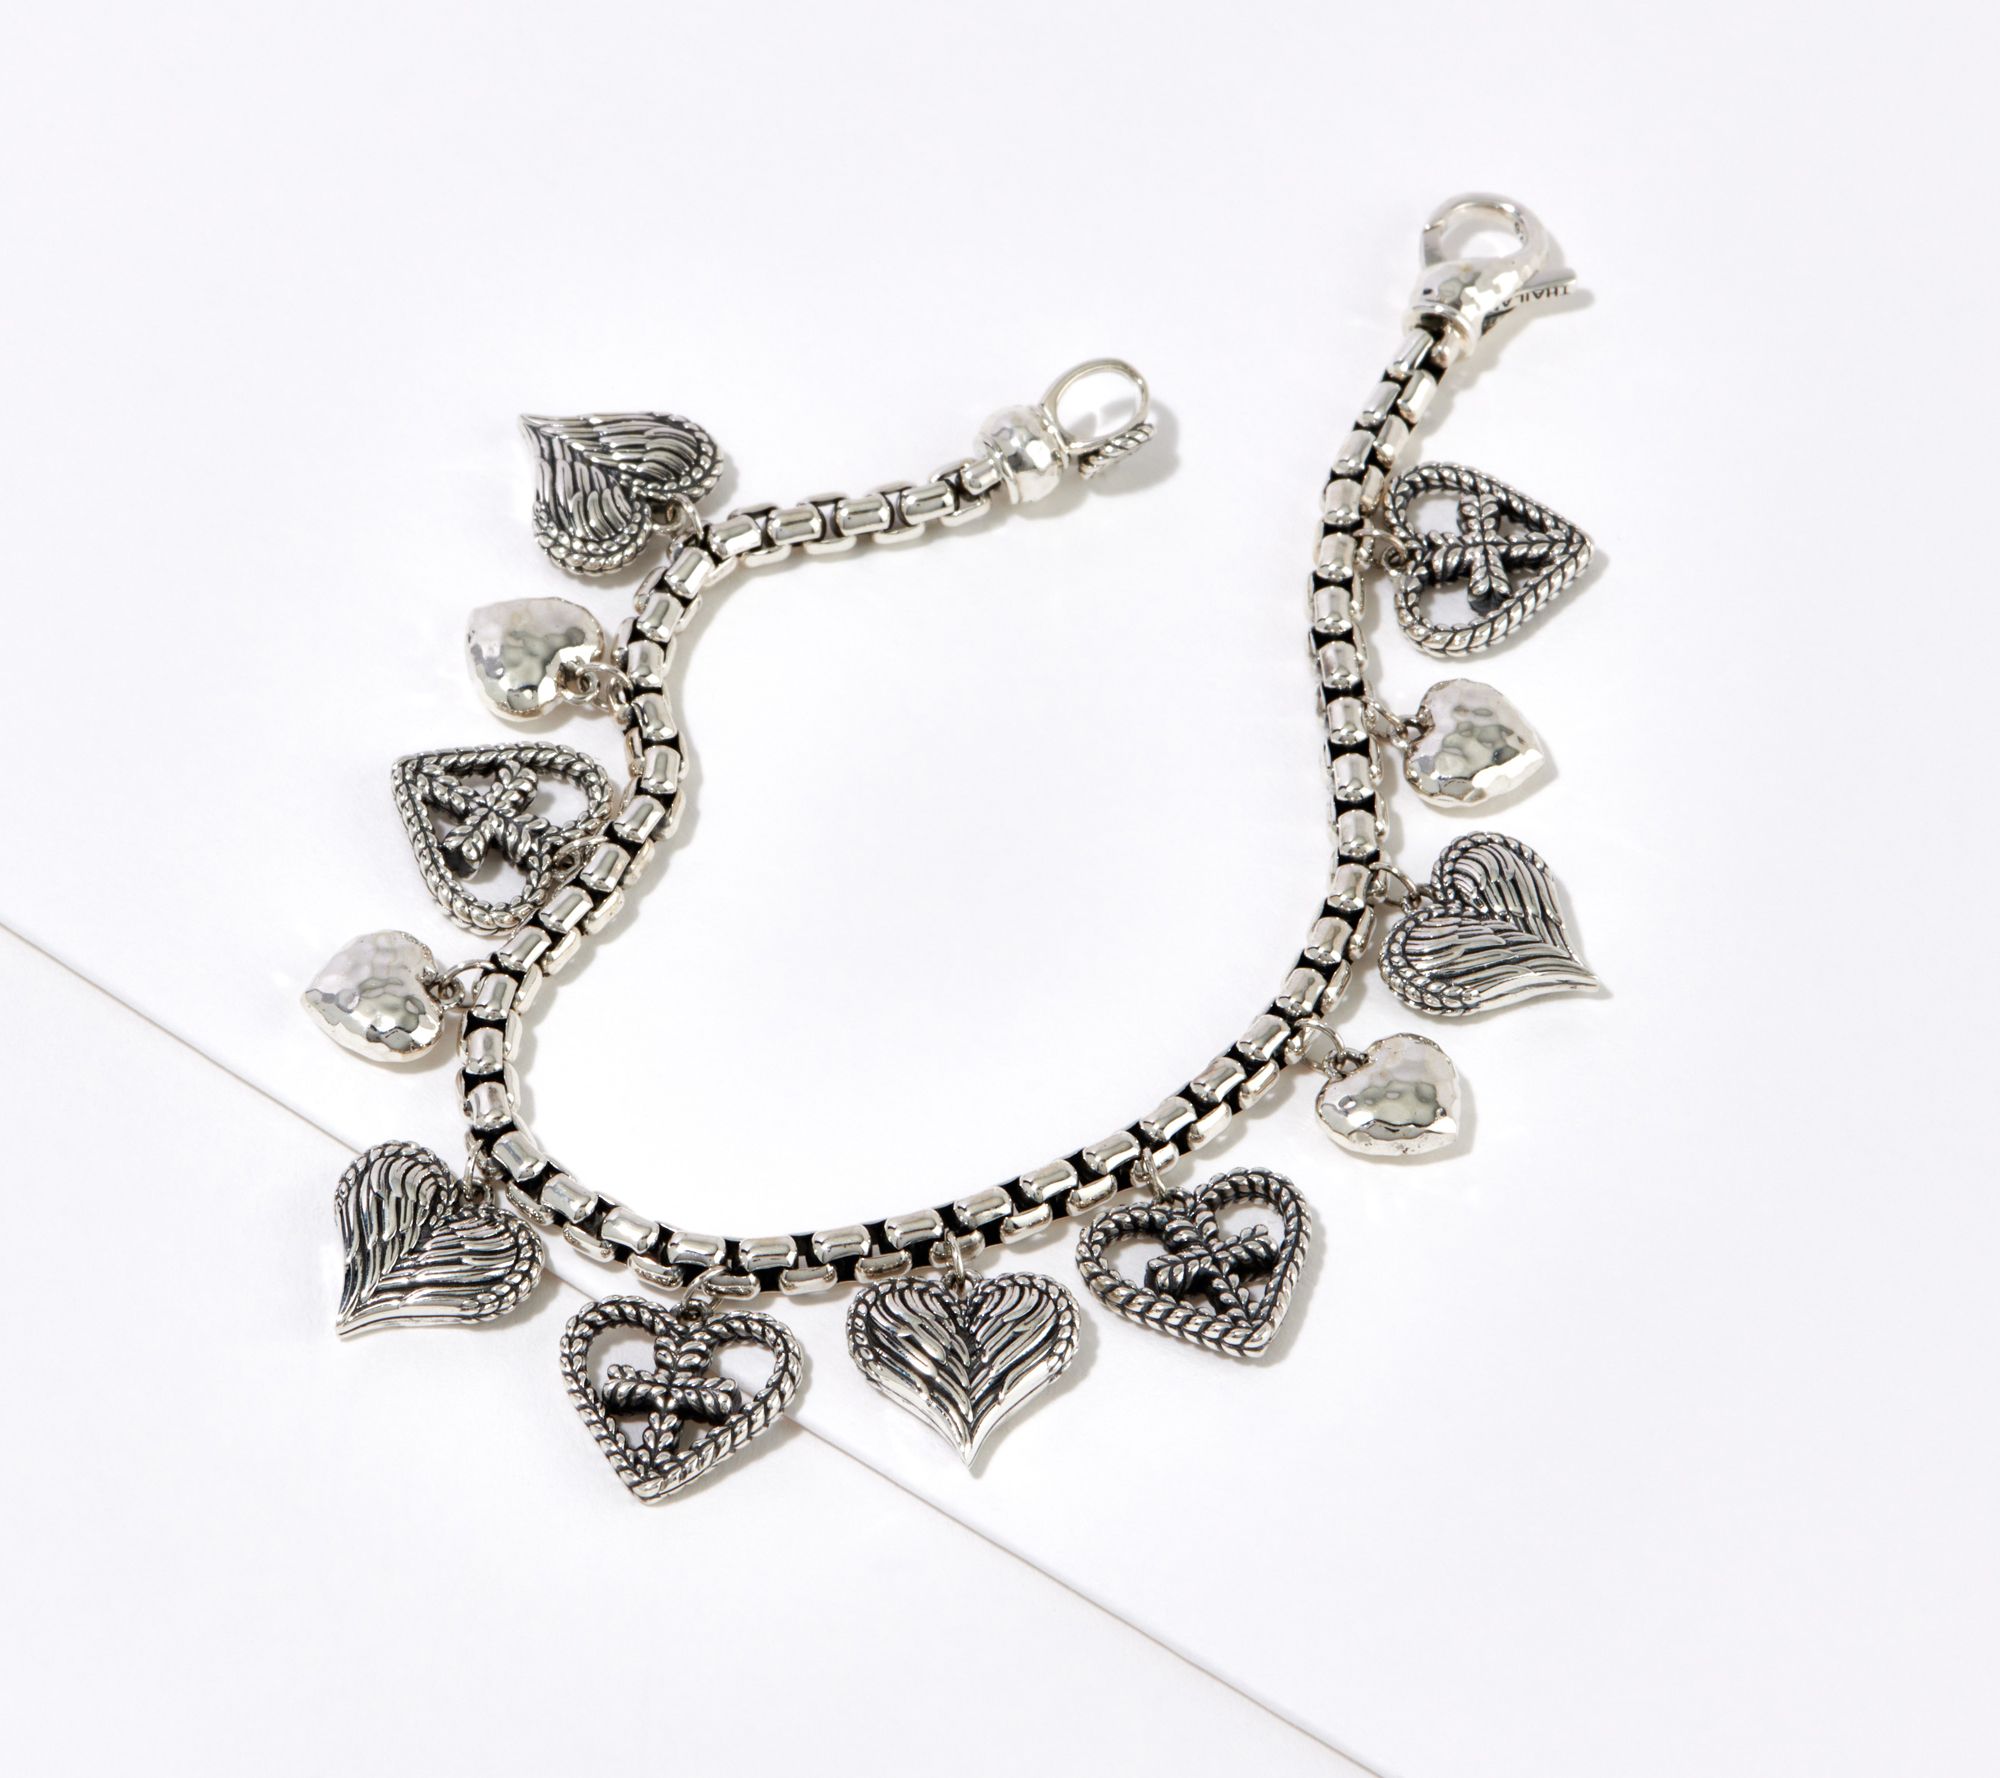 BRAND NEW Sparkly Rhinestone Personalised Silver Heart Charm Bracelet & Gift Bag 